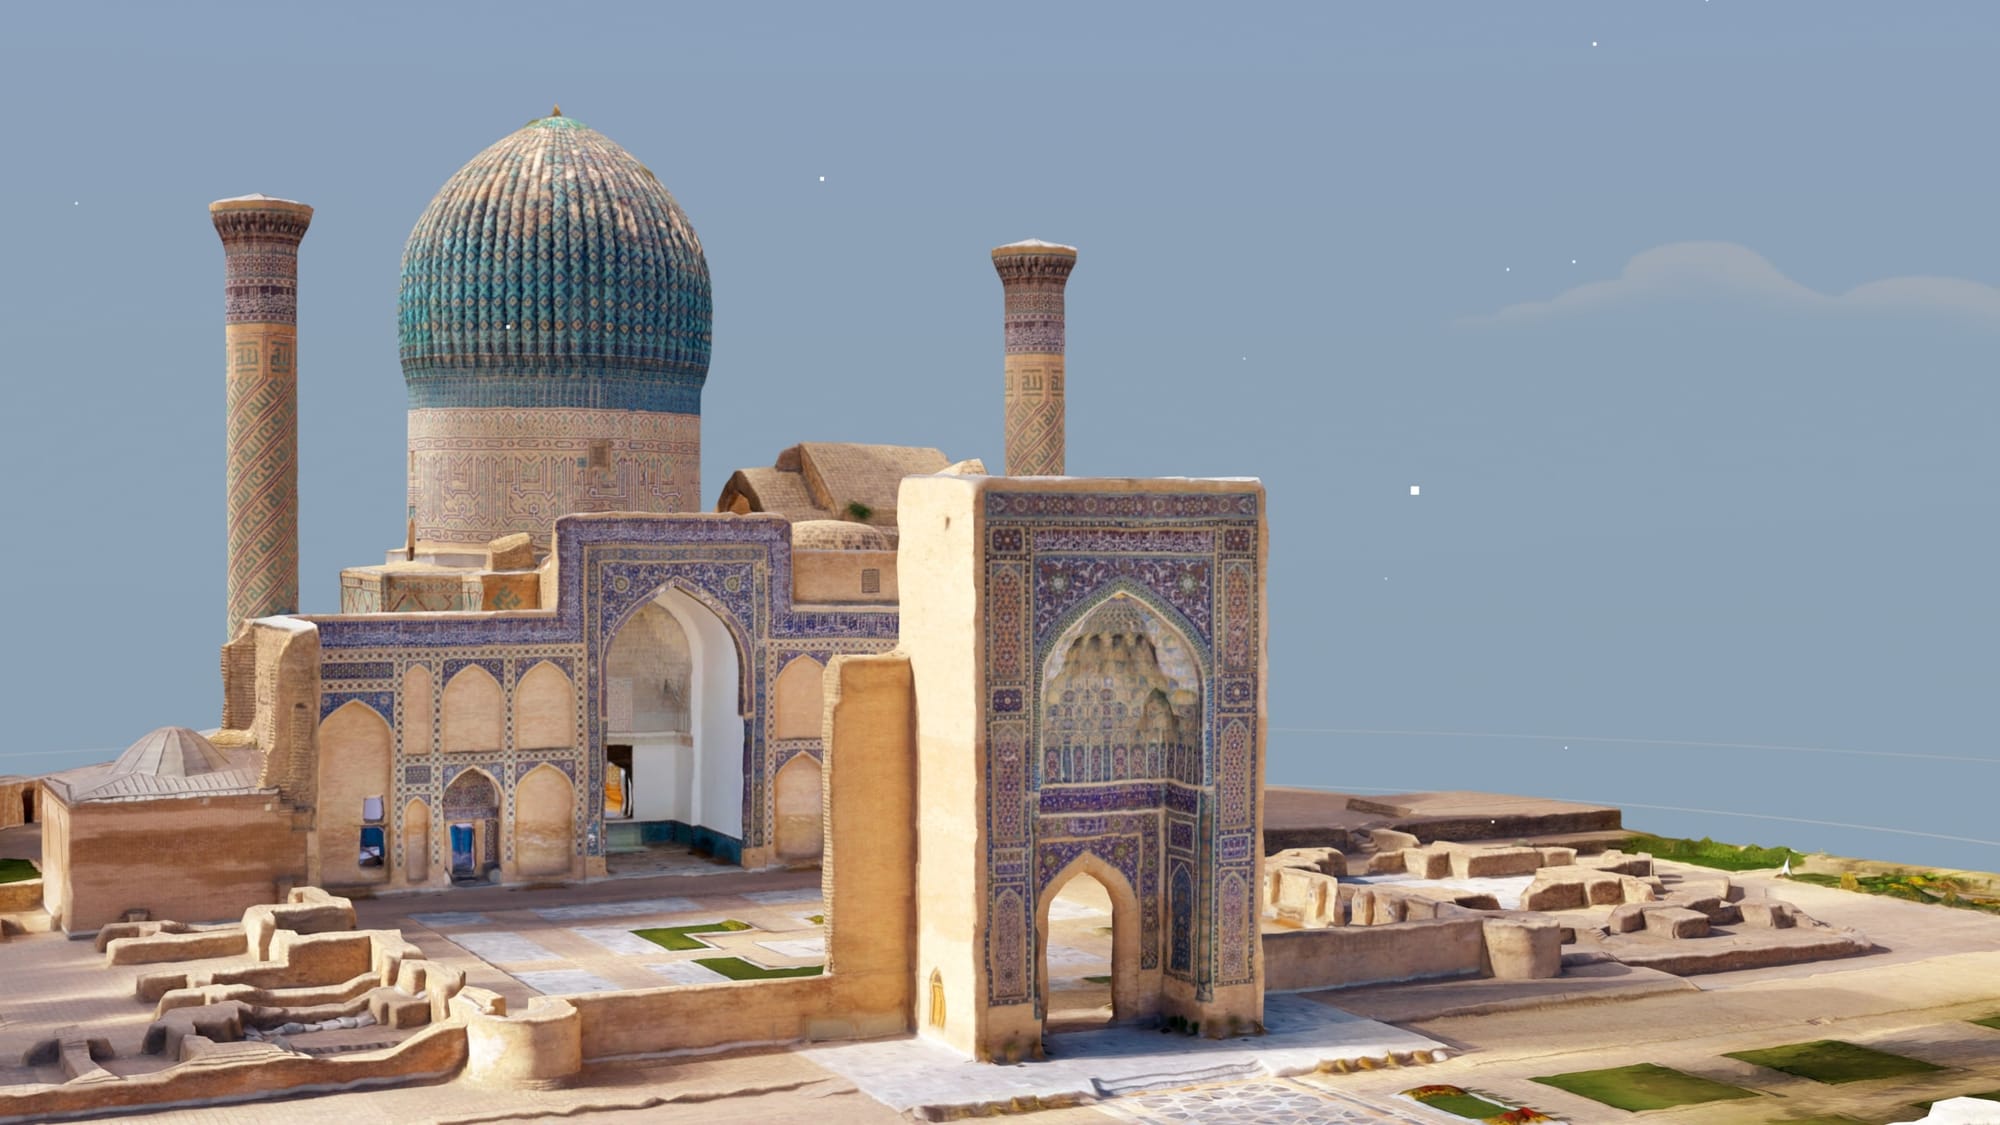 🧩 Puzzling Places DLC - Monthly Pack #20: Tamerlane